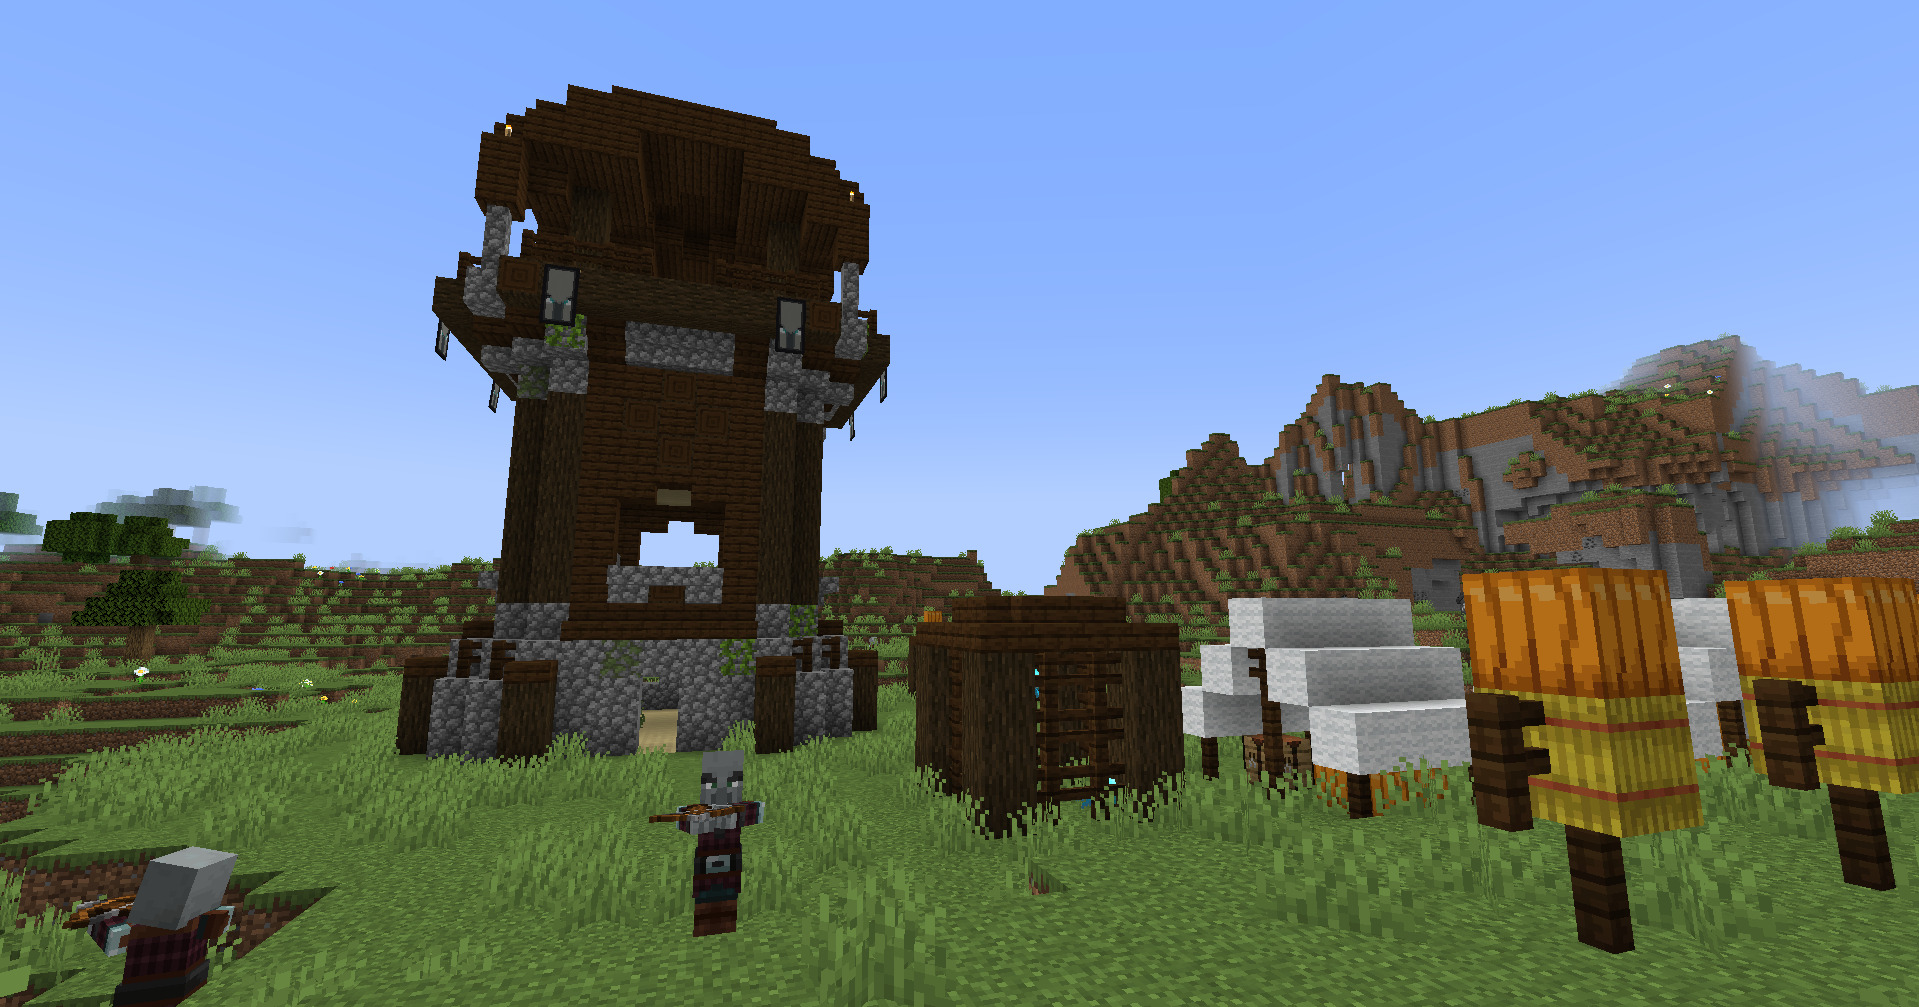 A screenshot showing a pillager tower in Minecraft